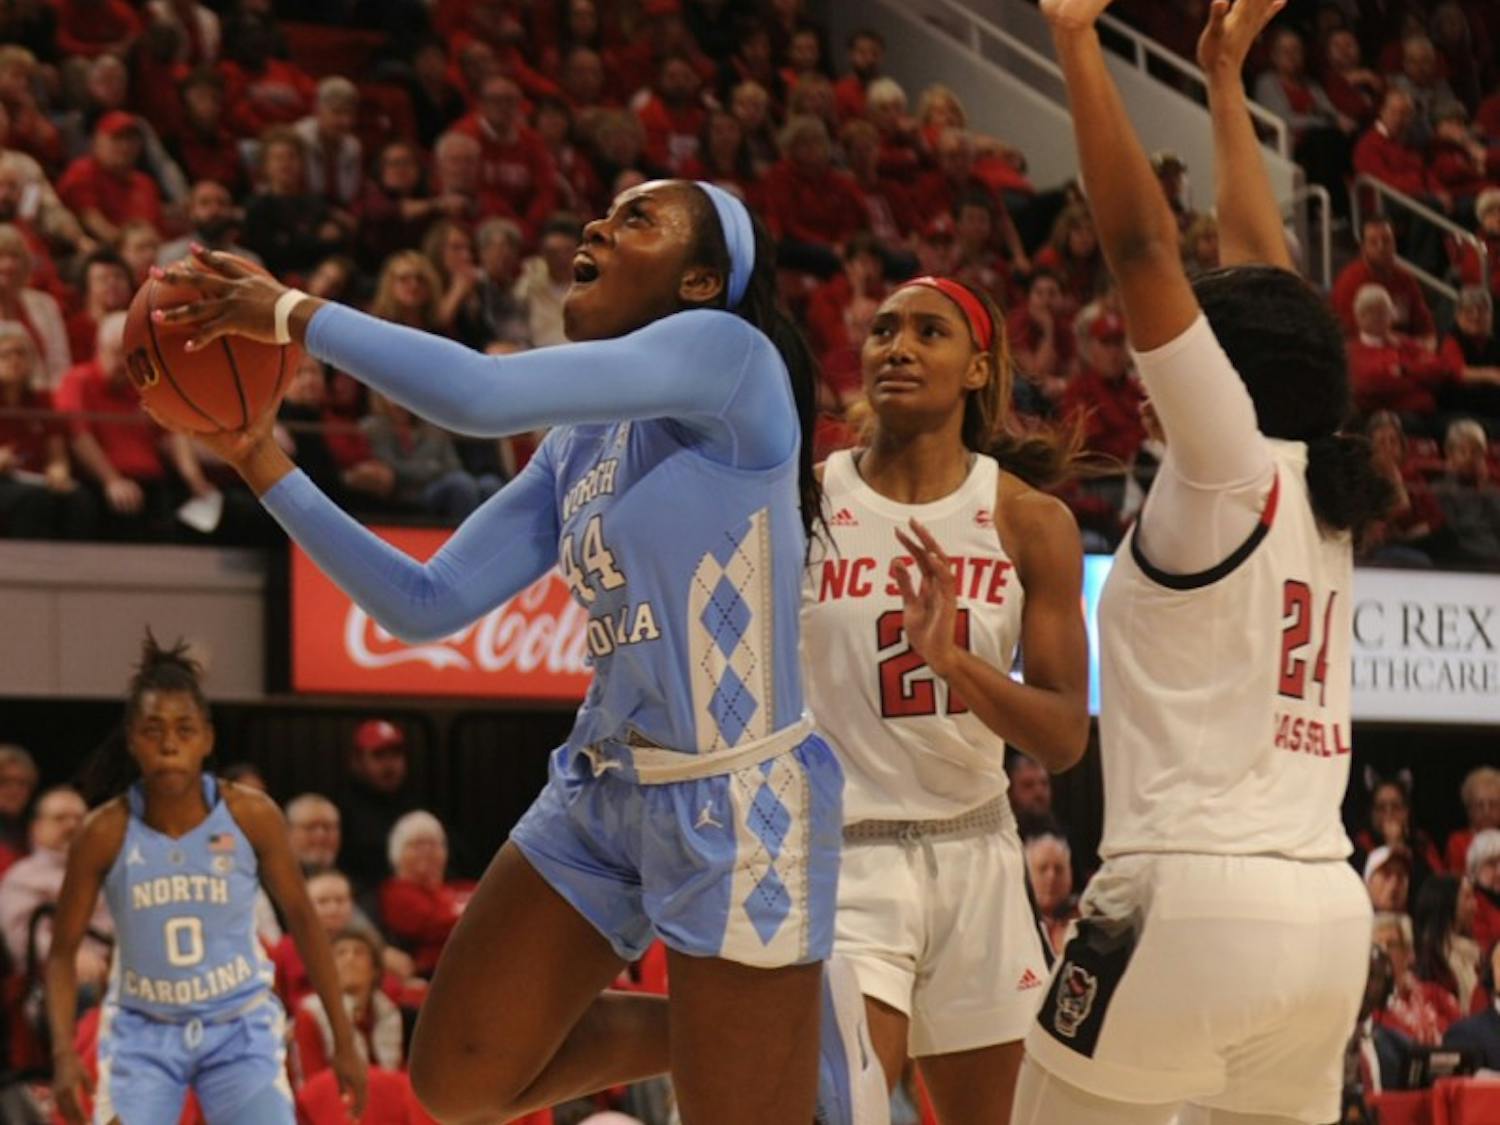 Sophomore center Janelle Bailey (44) prepares to make a basket during the game against NC State on Sunday, Feb 3, 2019 at Reynolds Coliseum. The UNC women's basketball team beat NC State 64 - 51.